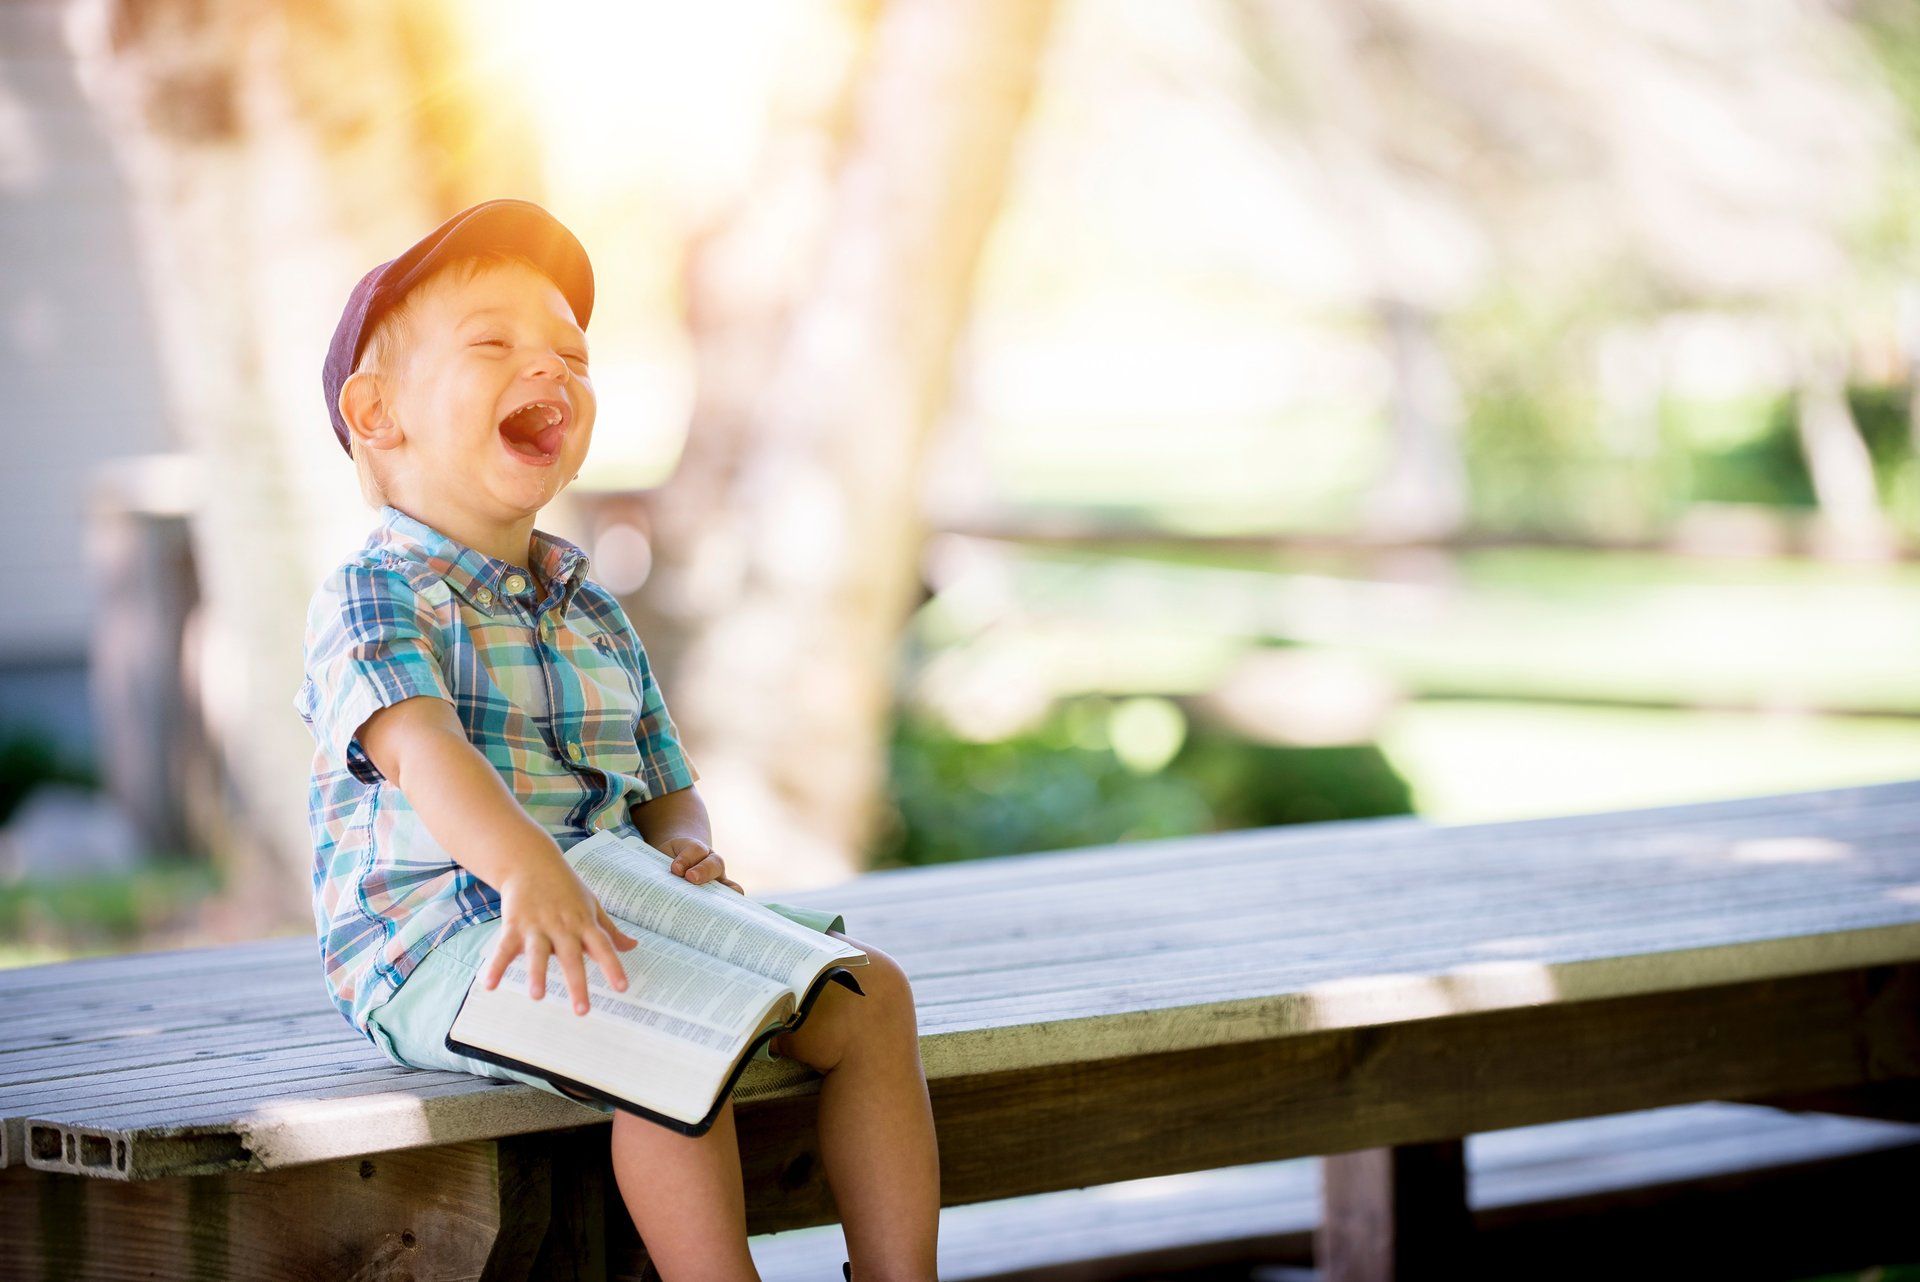 Laughing child with book on bench. Credit: Ben White at Unsplash.